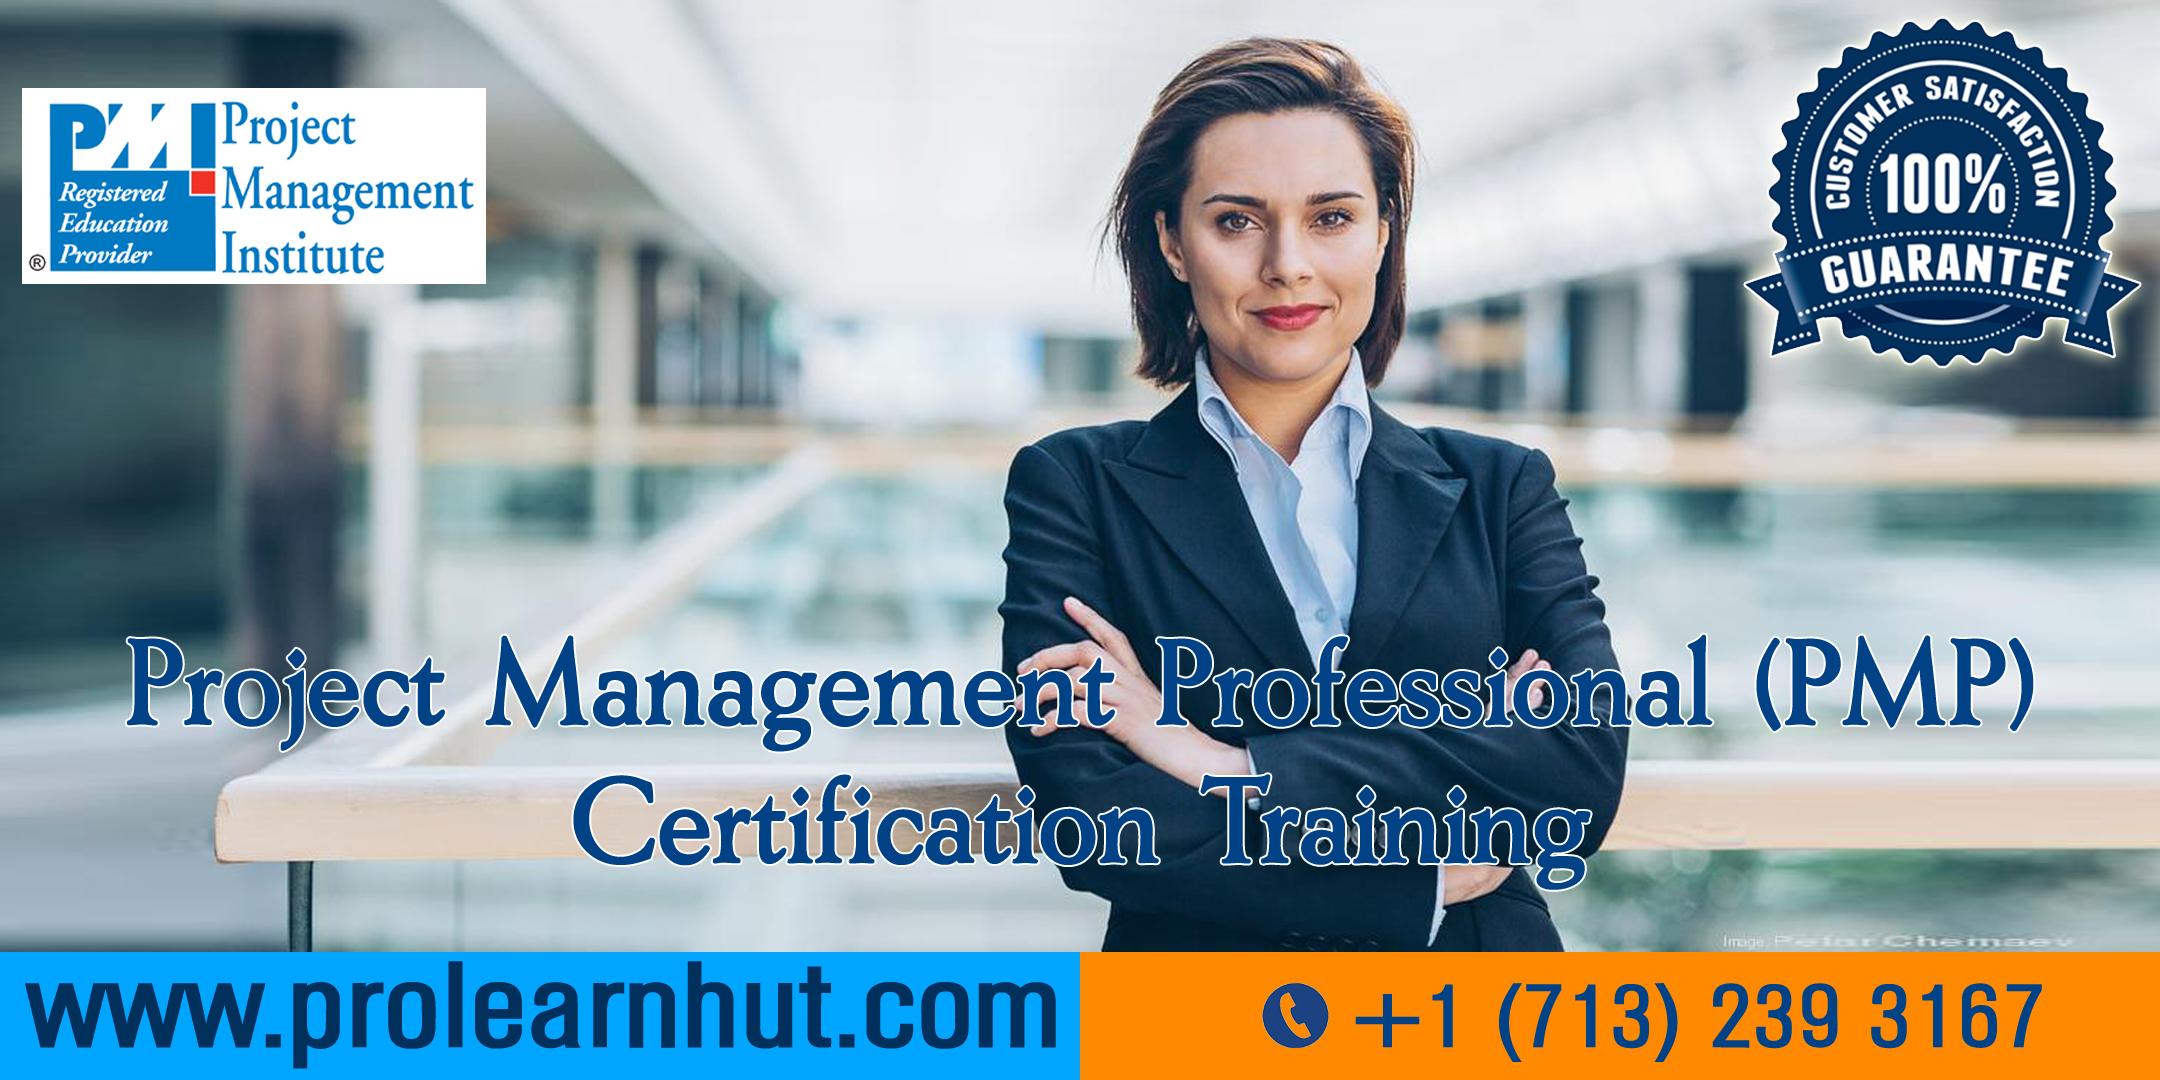 PMP Certification | Project Management Certification| PMP Training in Centennial, CO | ProLearnHut